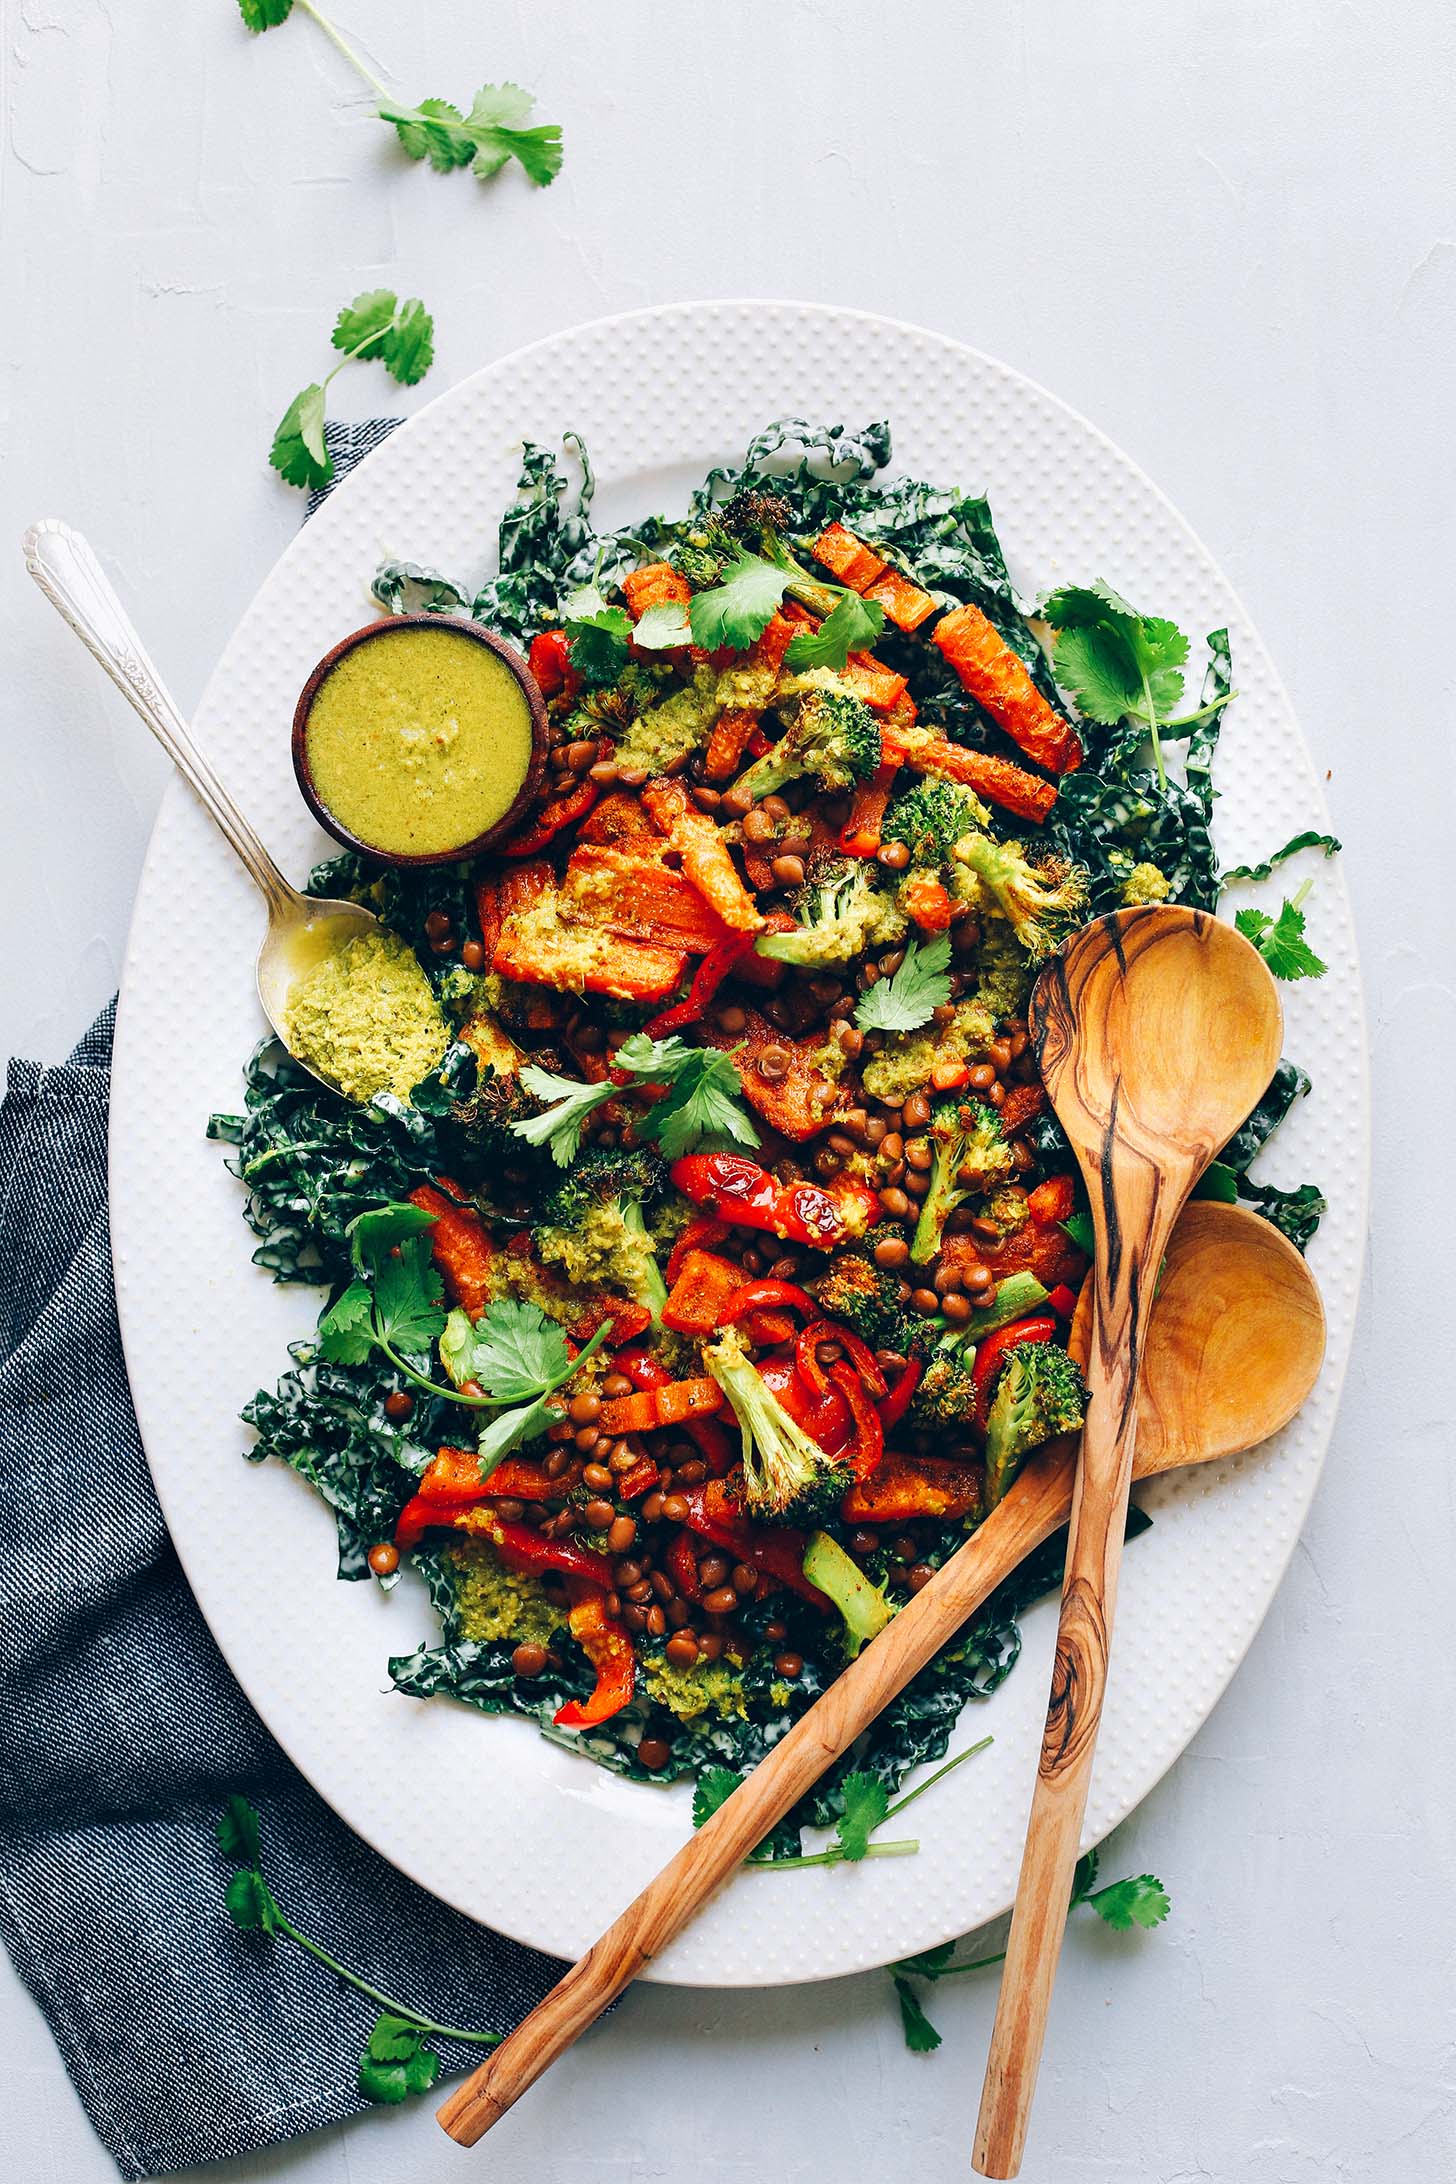 Platter full of Lentil Curry Salad with Kale, Roasted, Veggies, and Green Curry Dressing